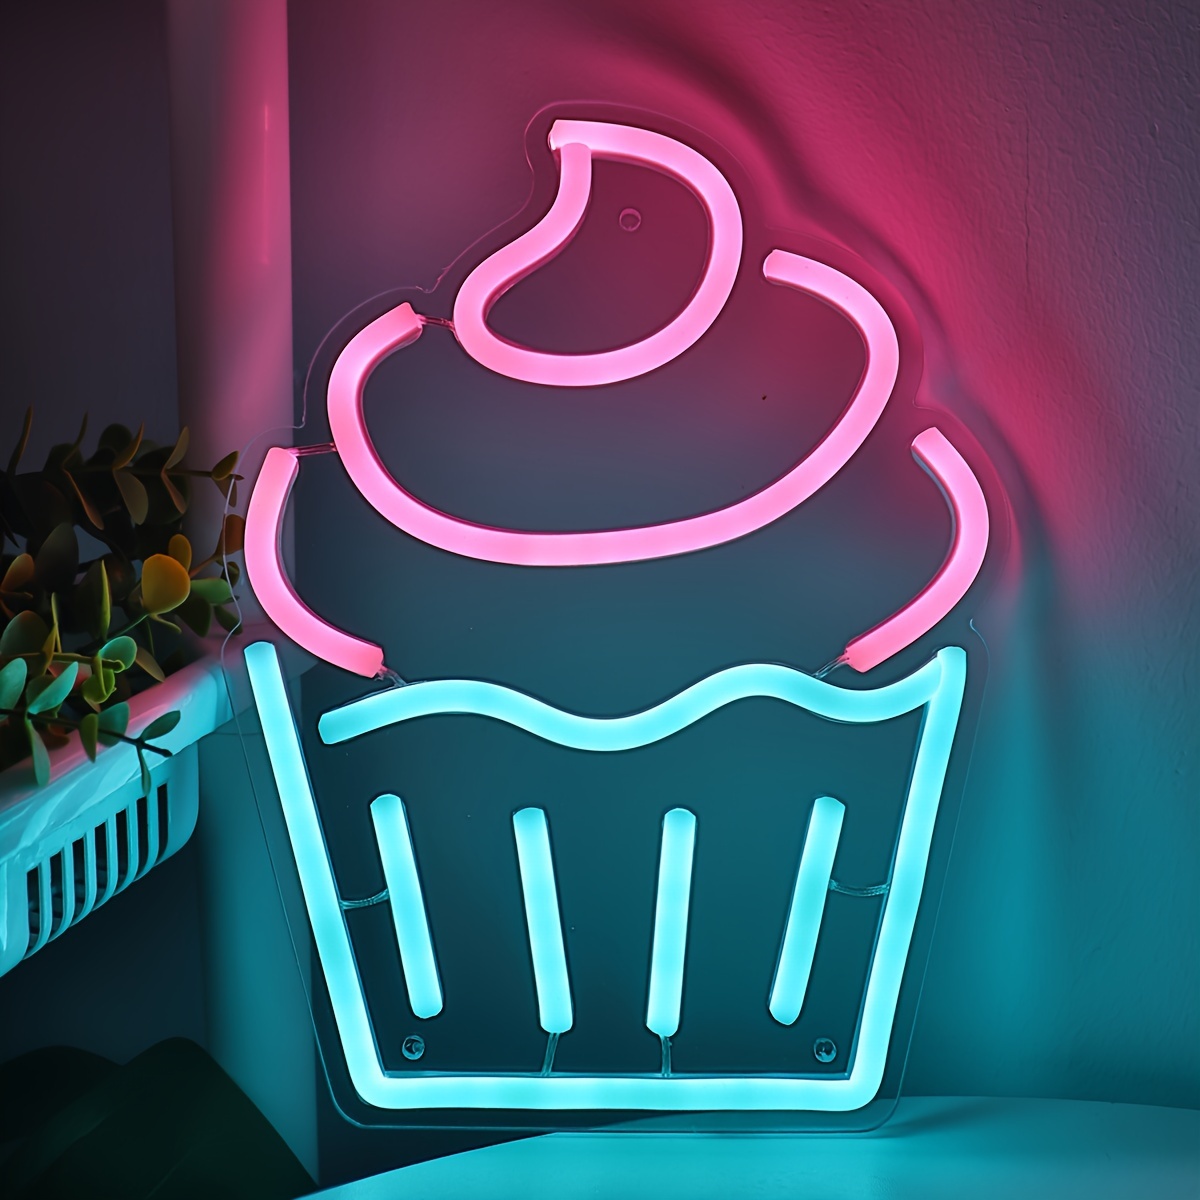 

Charming Muffin Cup Cake Led Neon Sign - Usb Powered Wall Light For Dessert Shops, Bakeries, Parties & Home Decor, 7.48''x9.84''